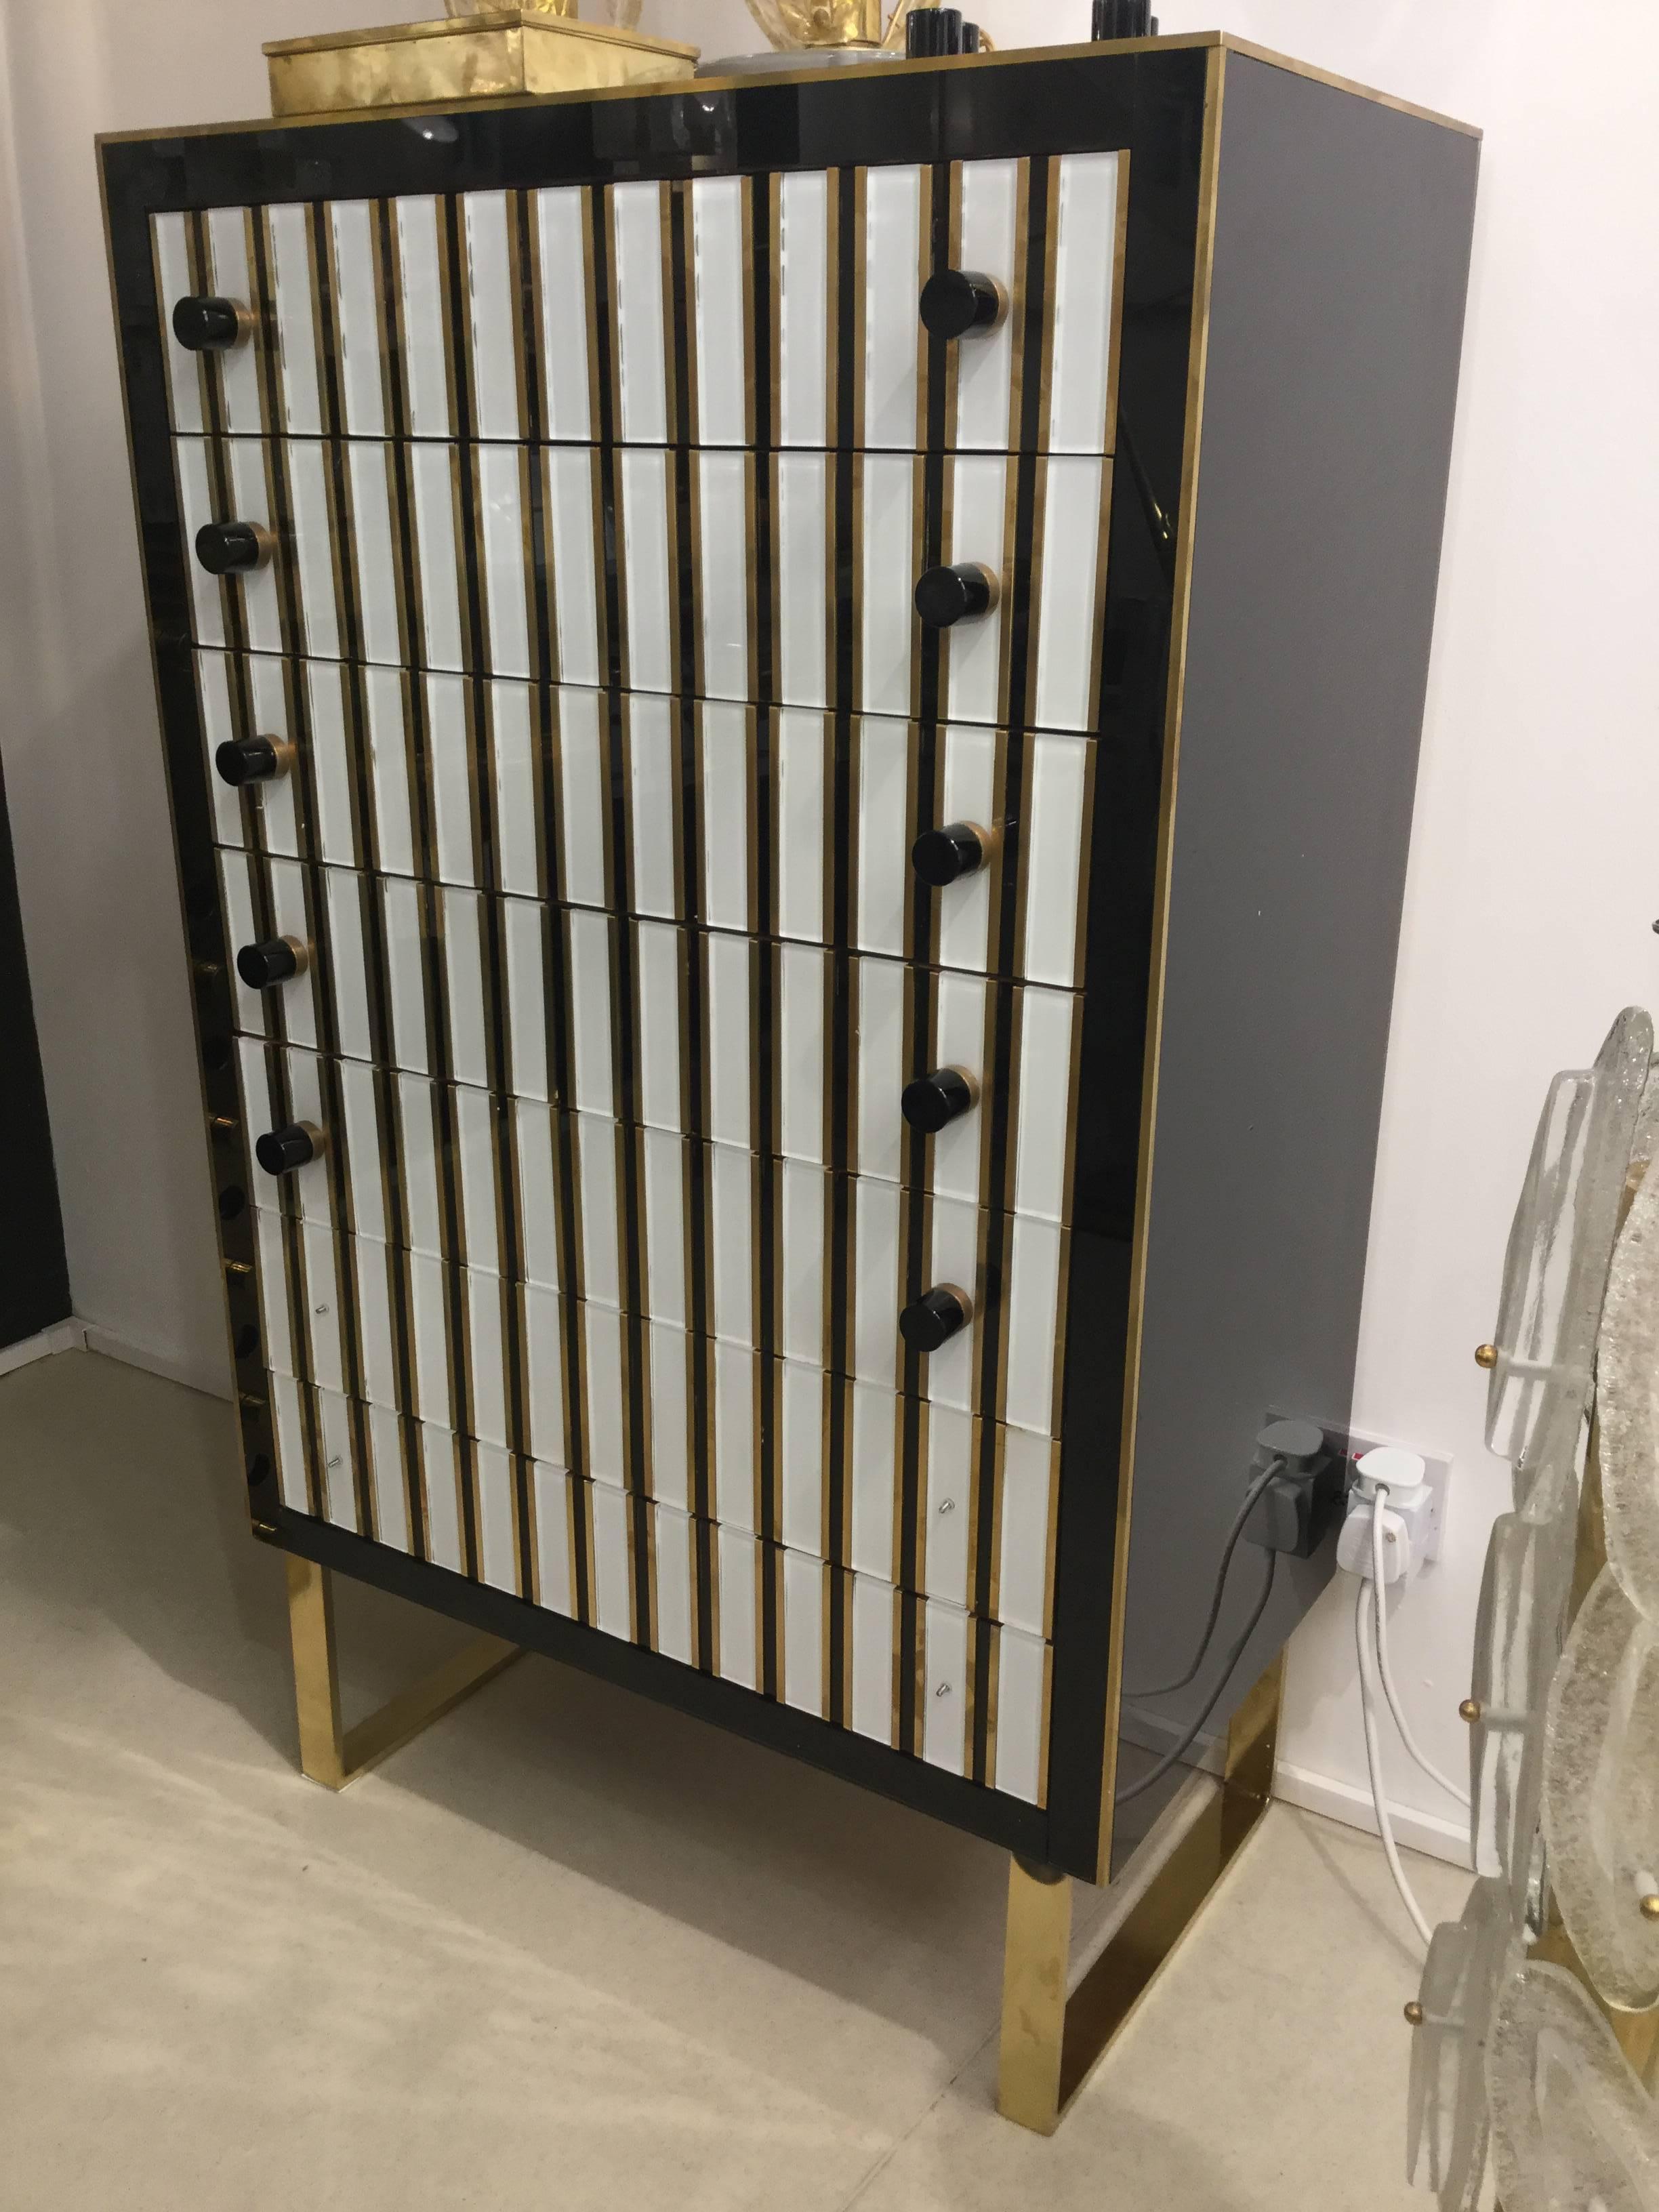 An Italian designed Postmodern Venetian 7 day chest of drawers in black and white glass inlaid with brass Murano black glass handles on brass legs, circa 1980.